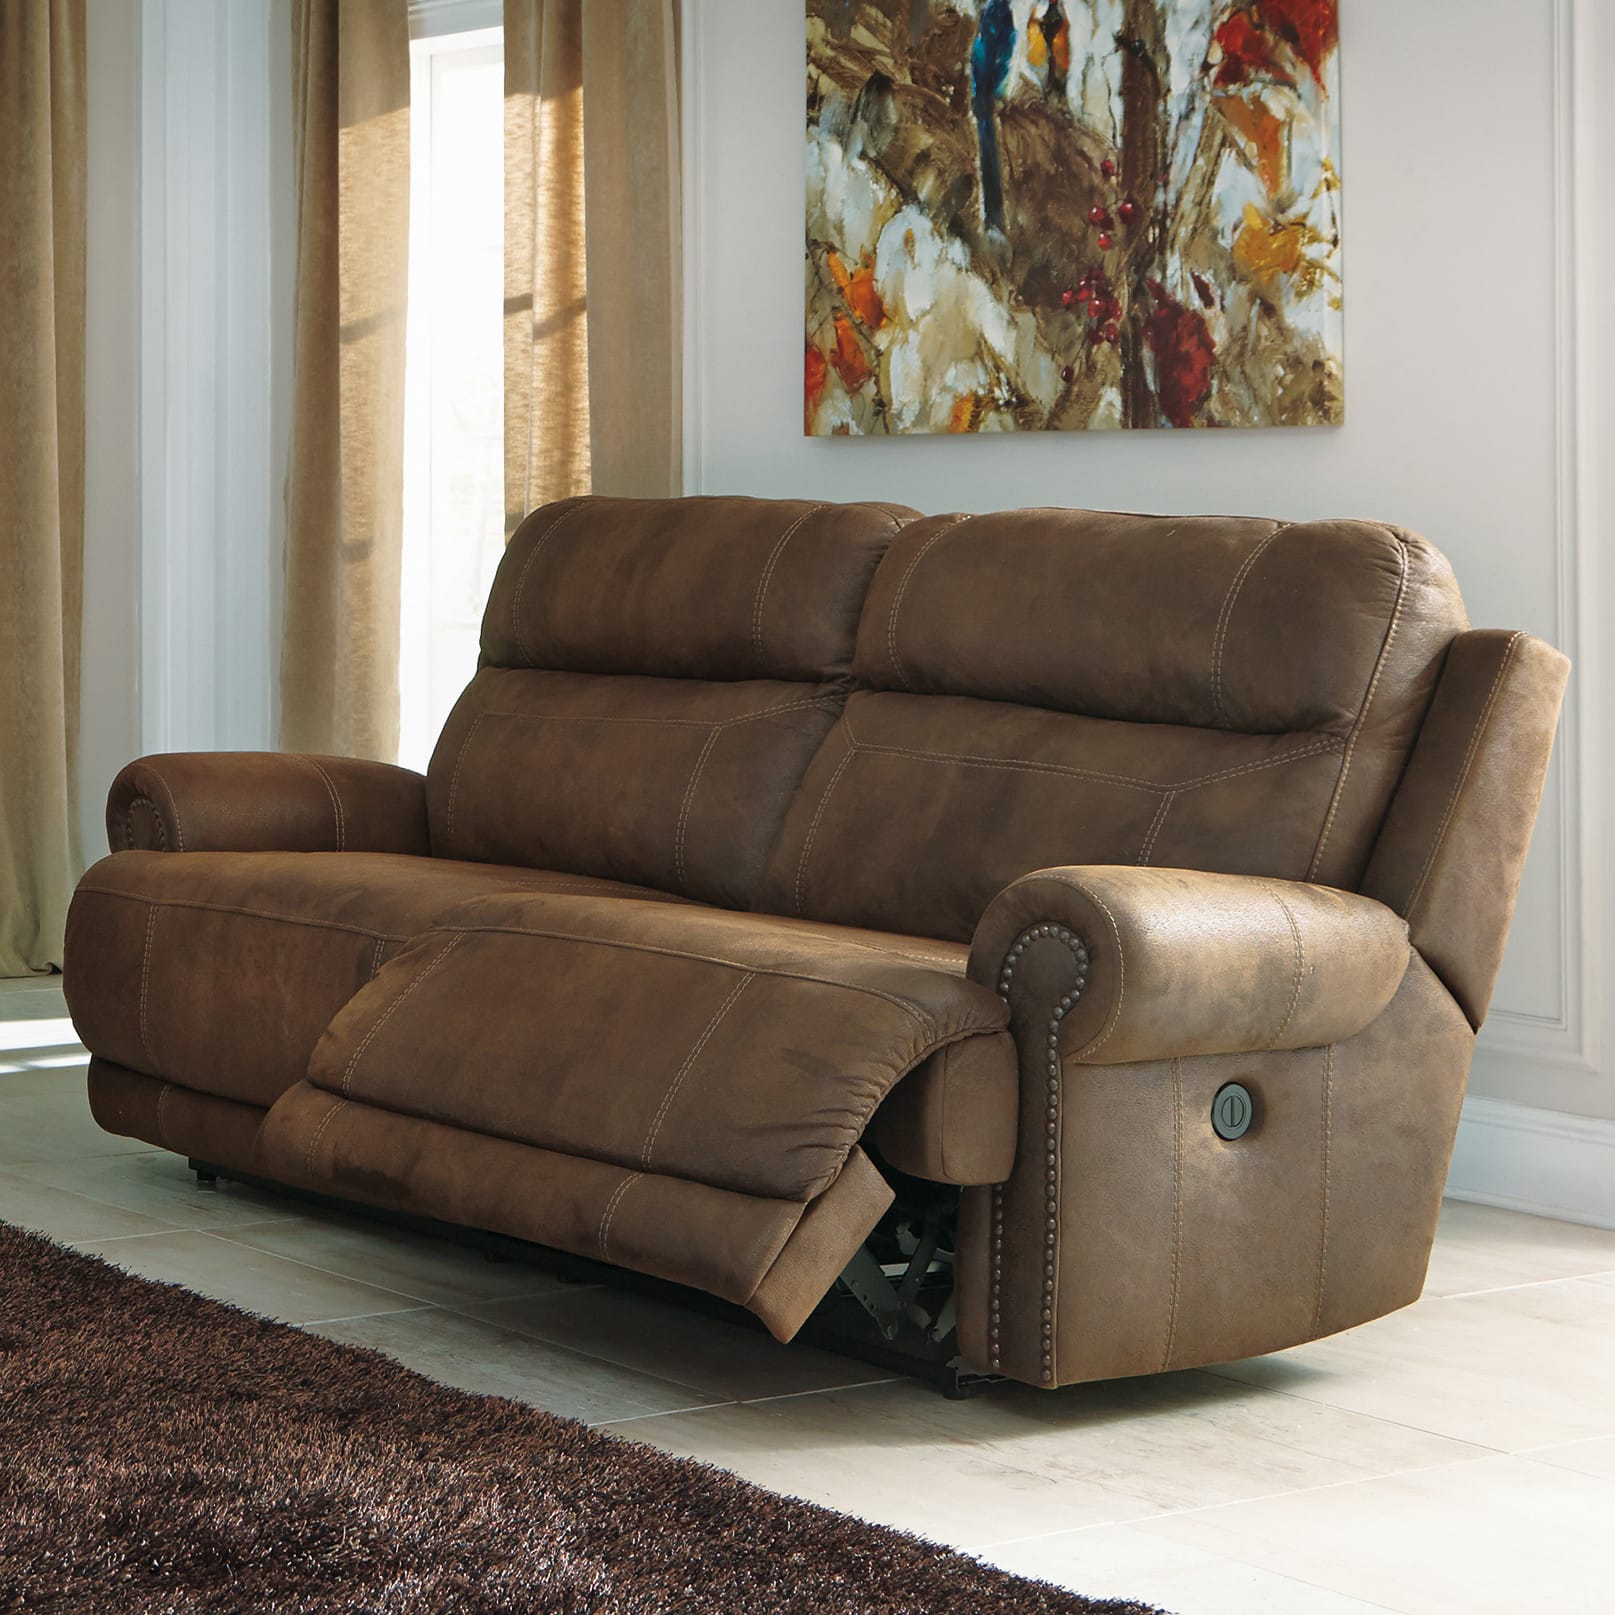 Floor Sample Austere 2 Seat Brown Reclining Sofa by Ashley Furniture